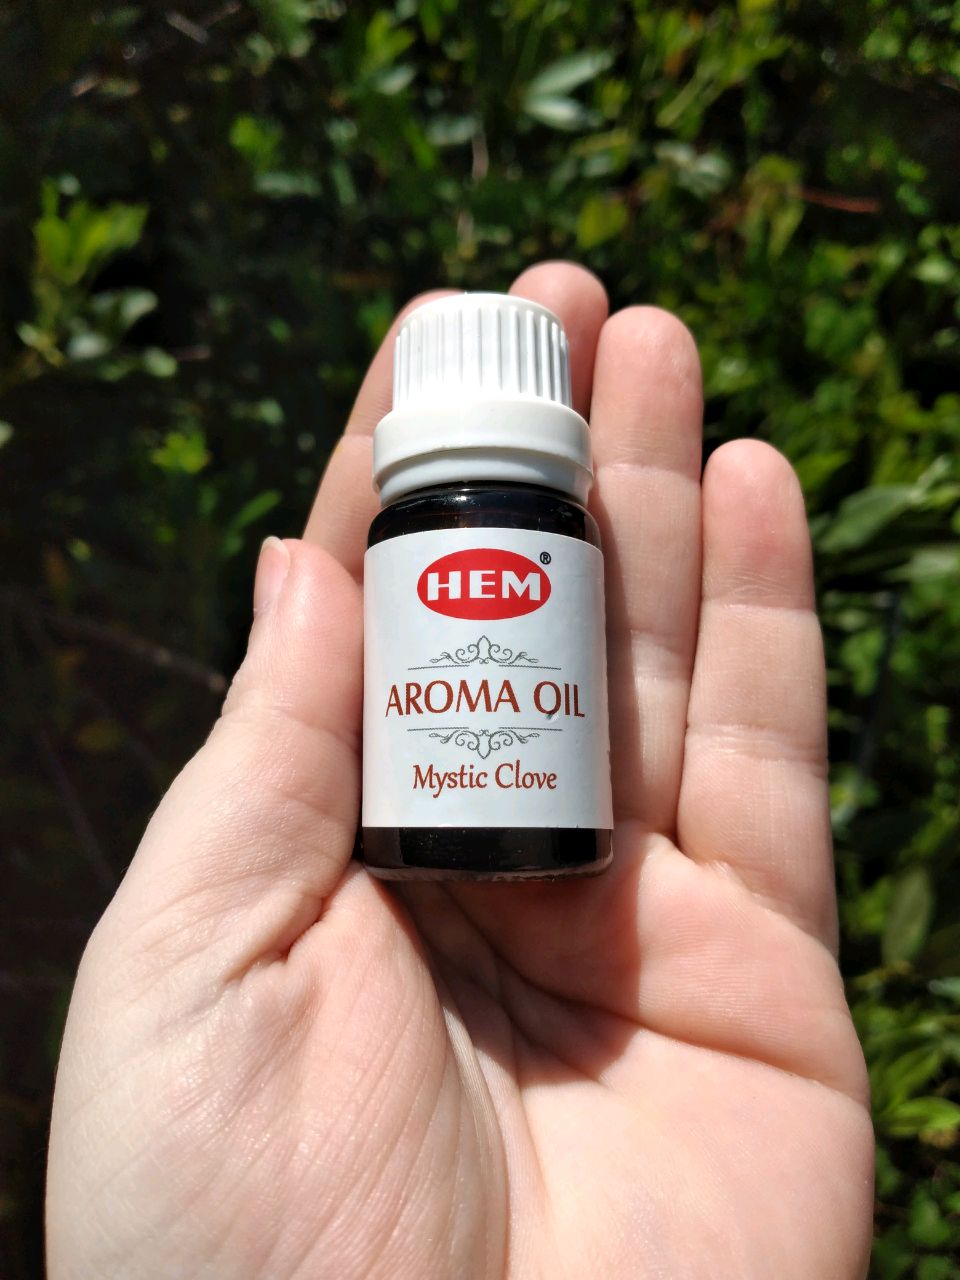 HEM Aroma Oil for Aromatherapy Diffusers & Lamps - 10ml Mystic Clove Scent 2